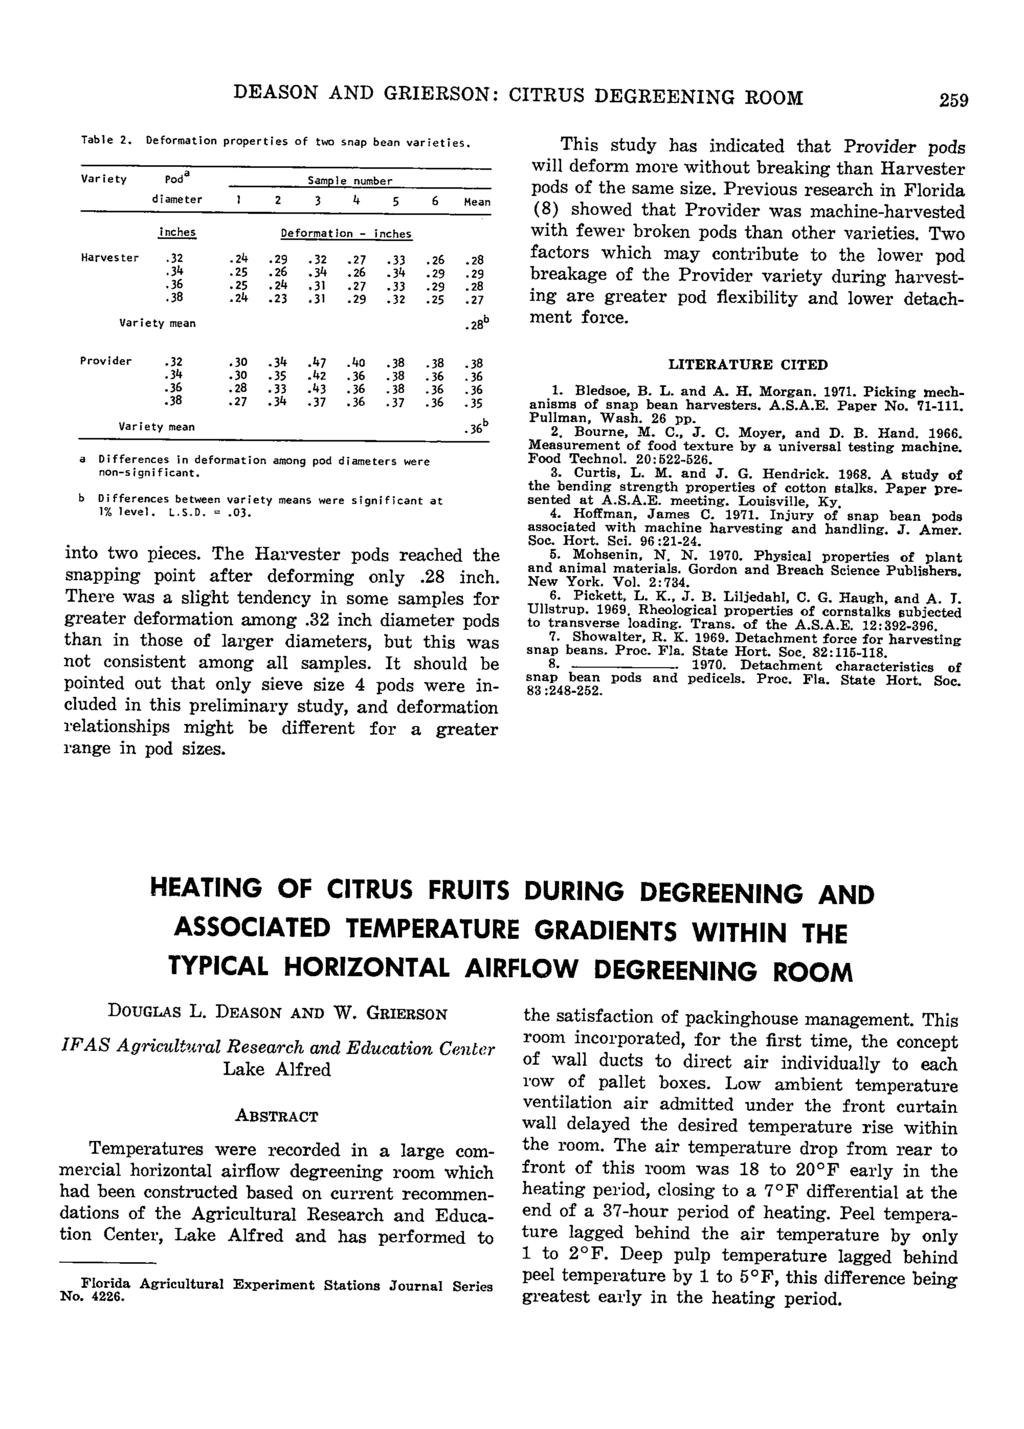 DEASON AND GRIERSON: CITRUS DEGREENING ROOM 259 Table 2. Deformation properties of two snap bean varieties. Variety Harvester Poda diameter inches,*36 Variety mean 1.2k.